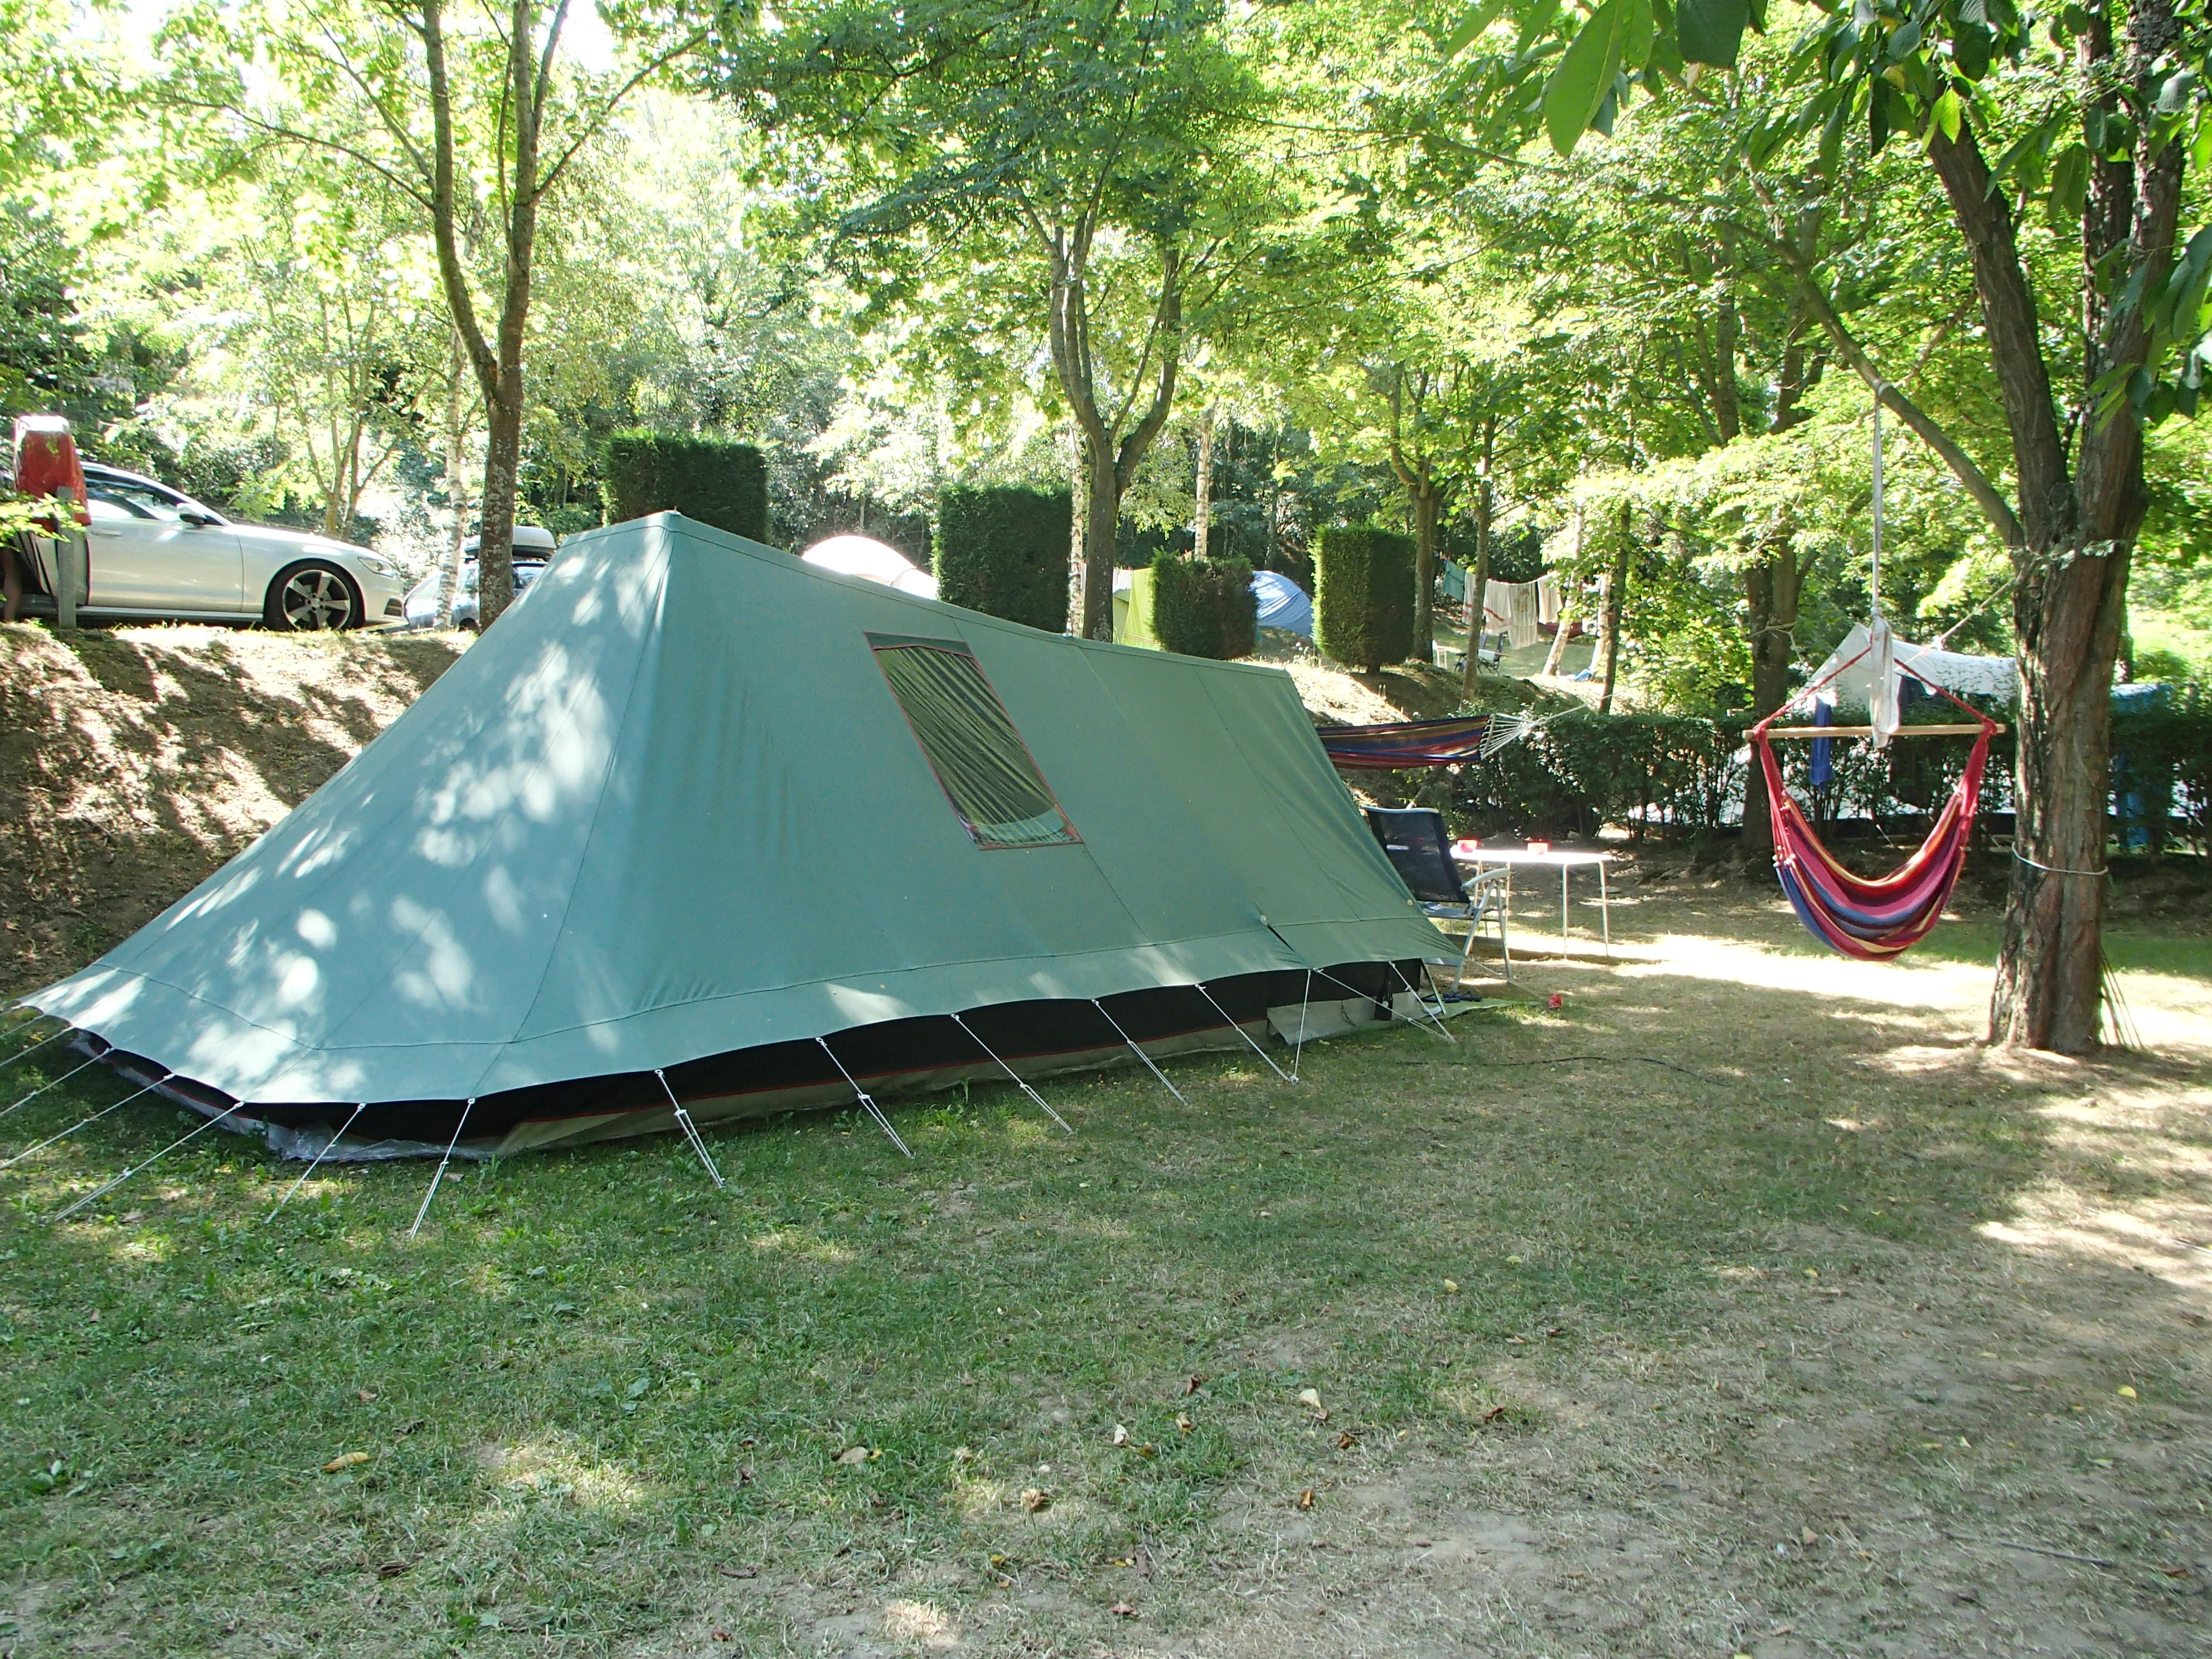 Stellplatz - Pitch Privilege Xxl (150-200M²) Near The Swimming Pool, Only For Tents - Sites et Paysages L'Oasis